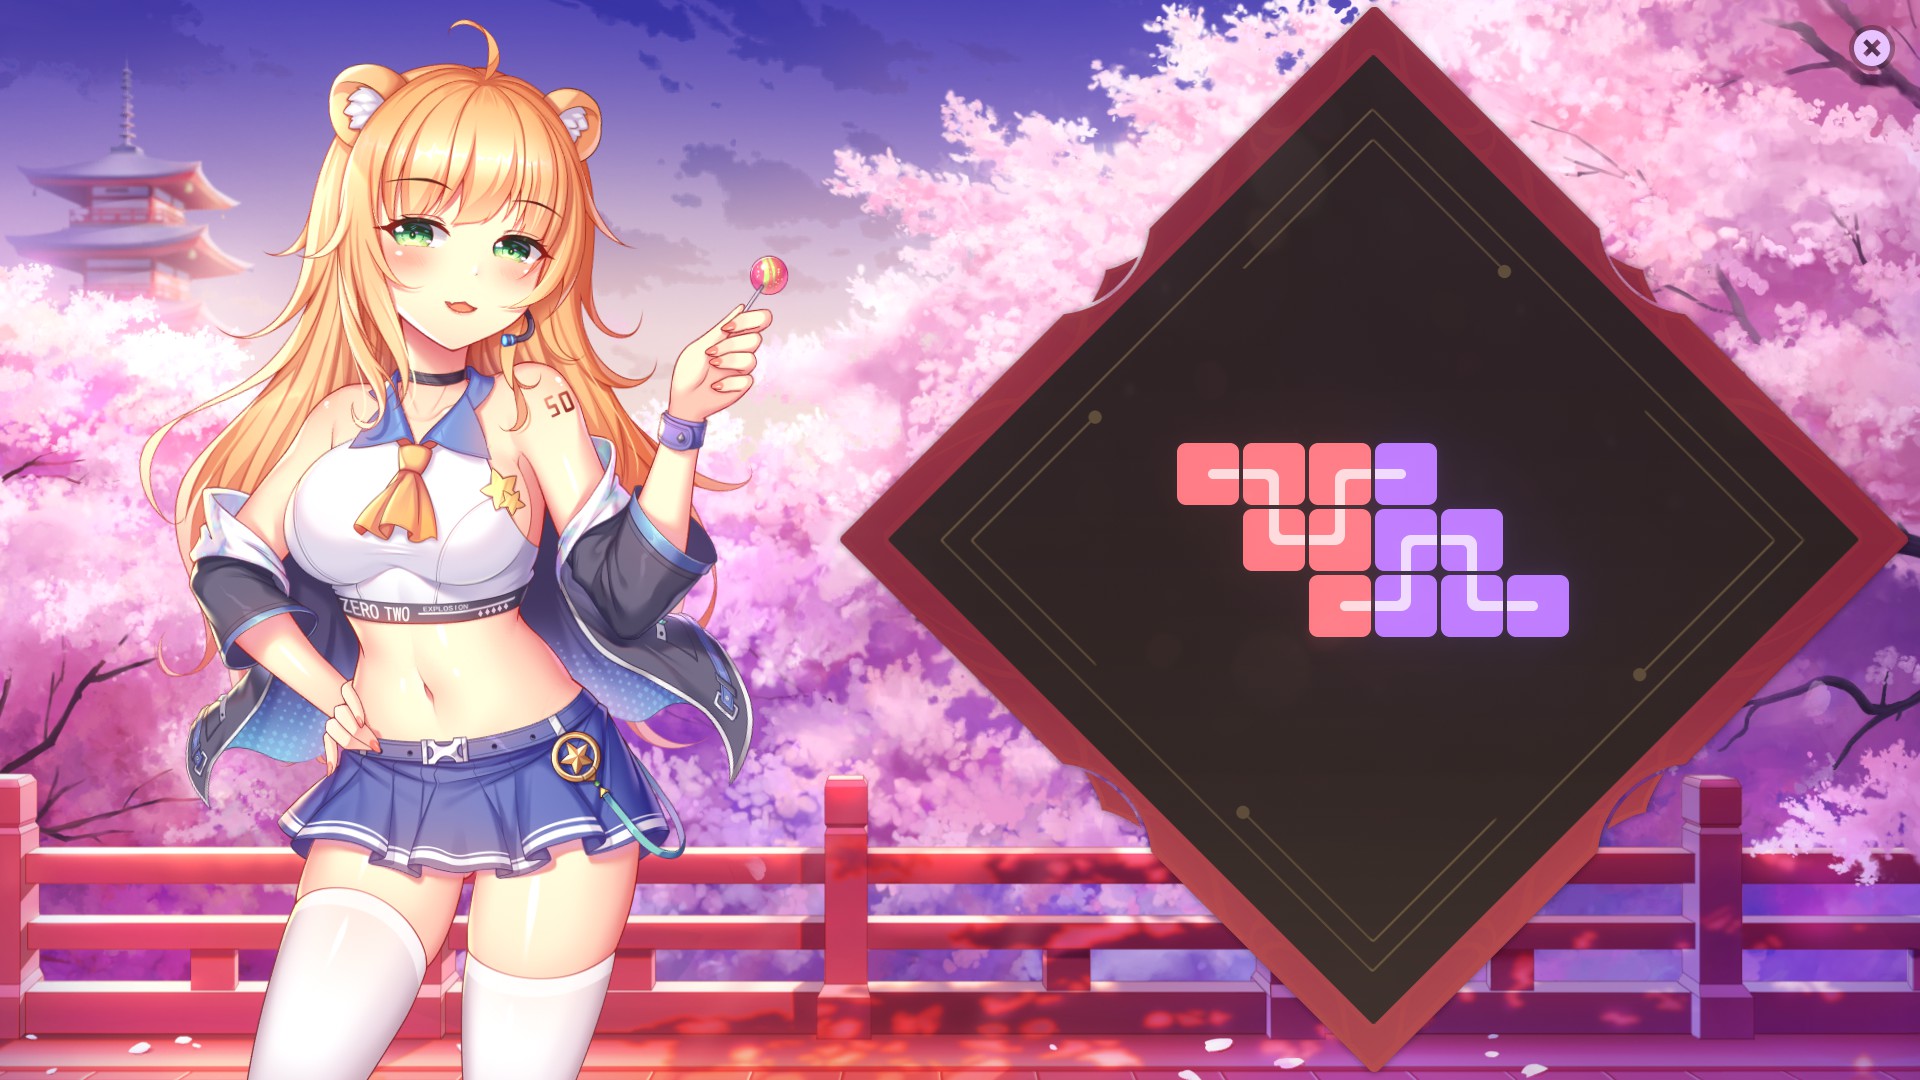 Sakura Hime 2 Achievement Guide - Images of completed levels - 42A37E7